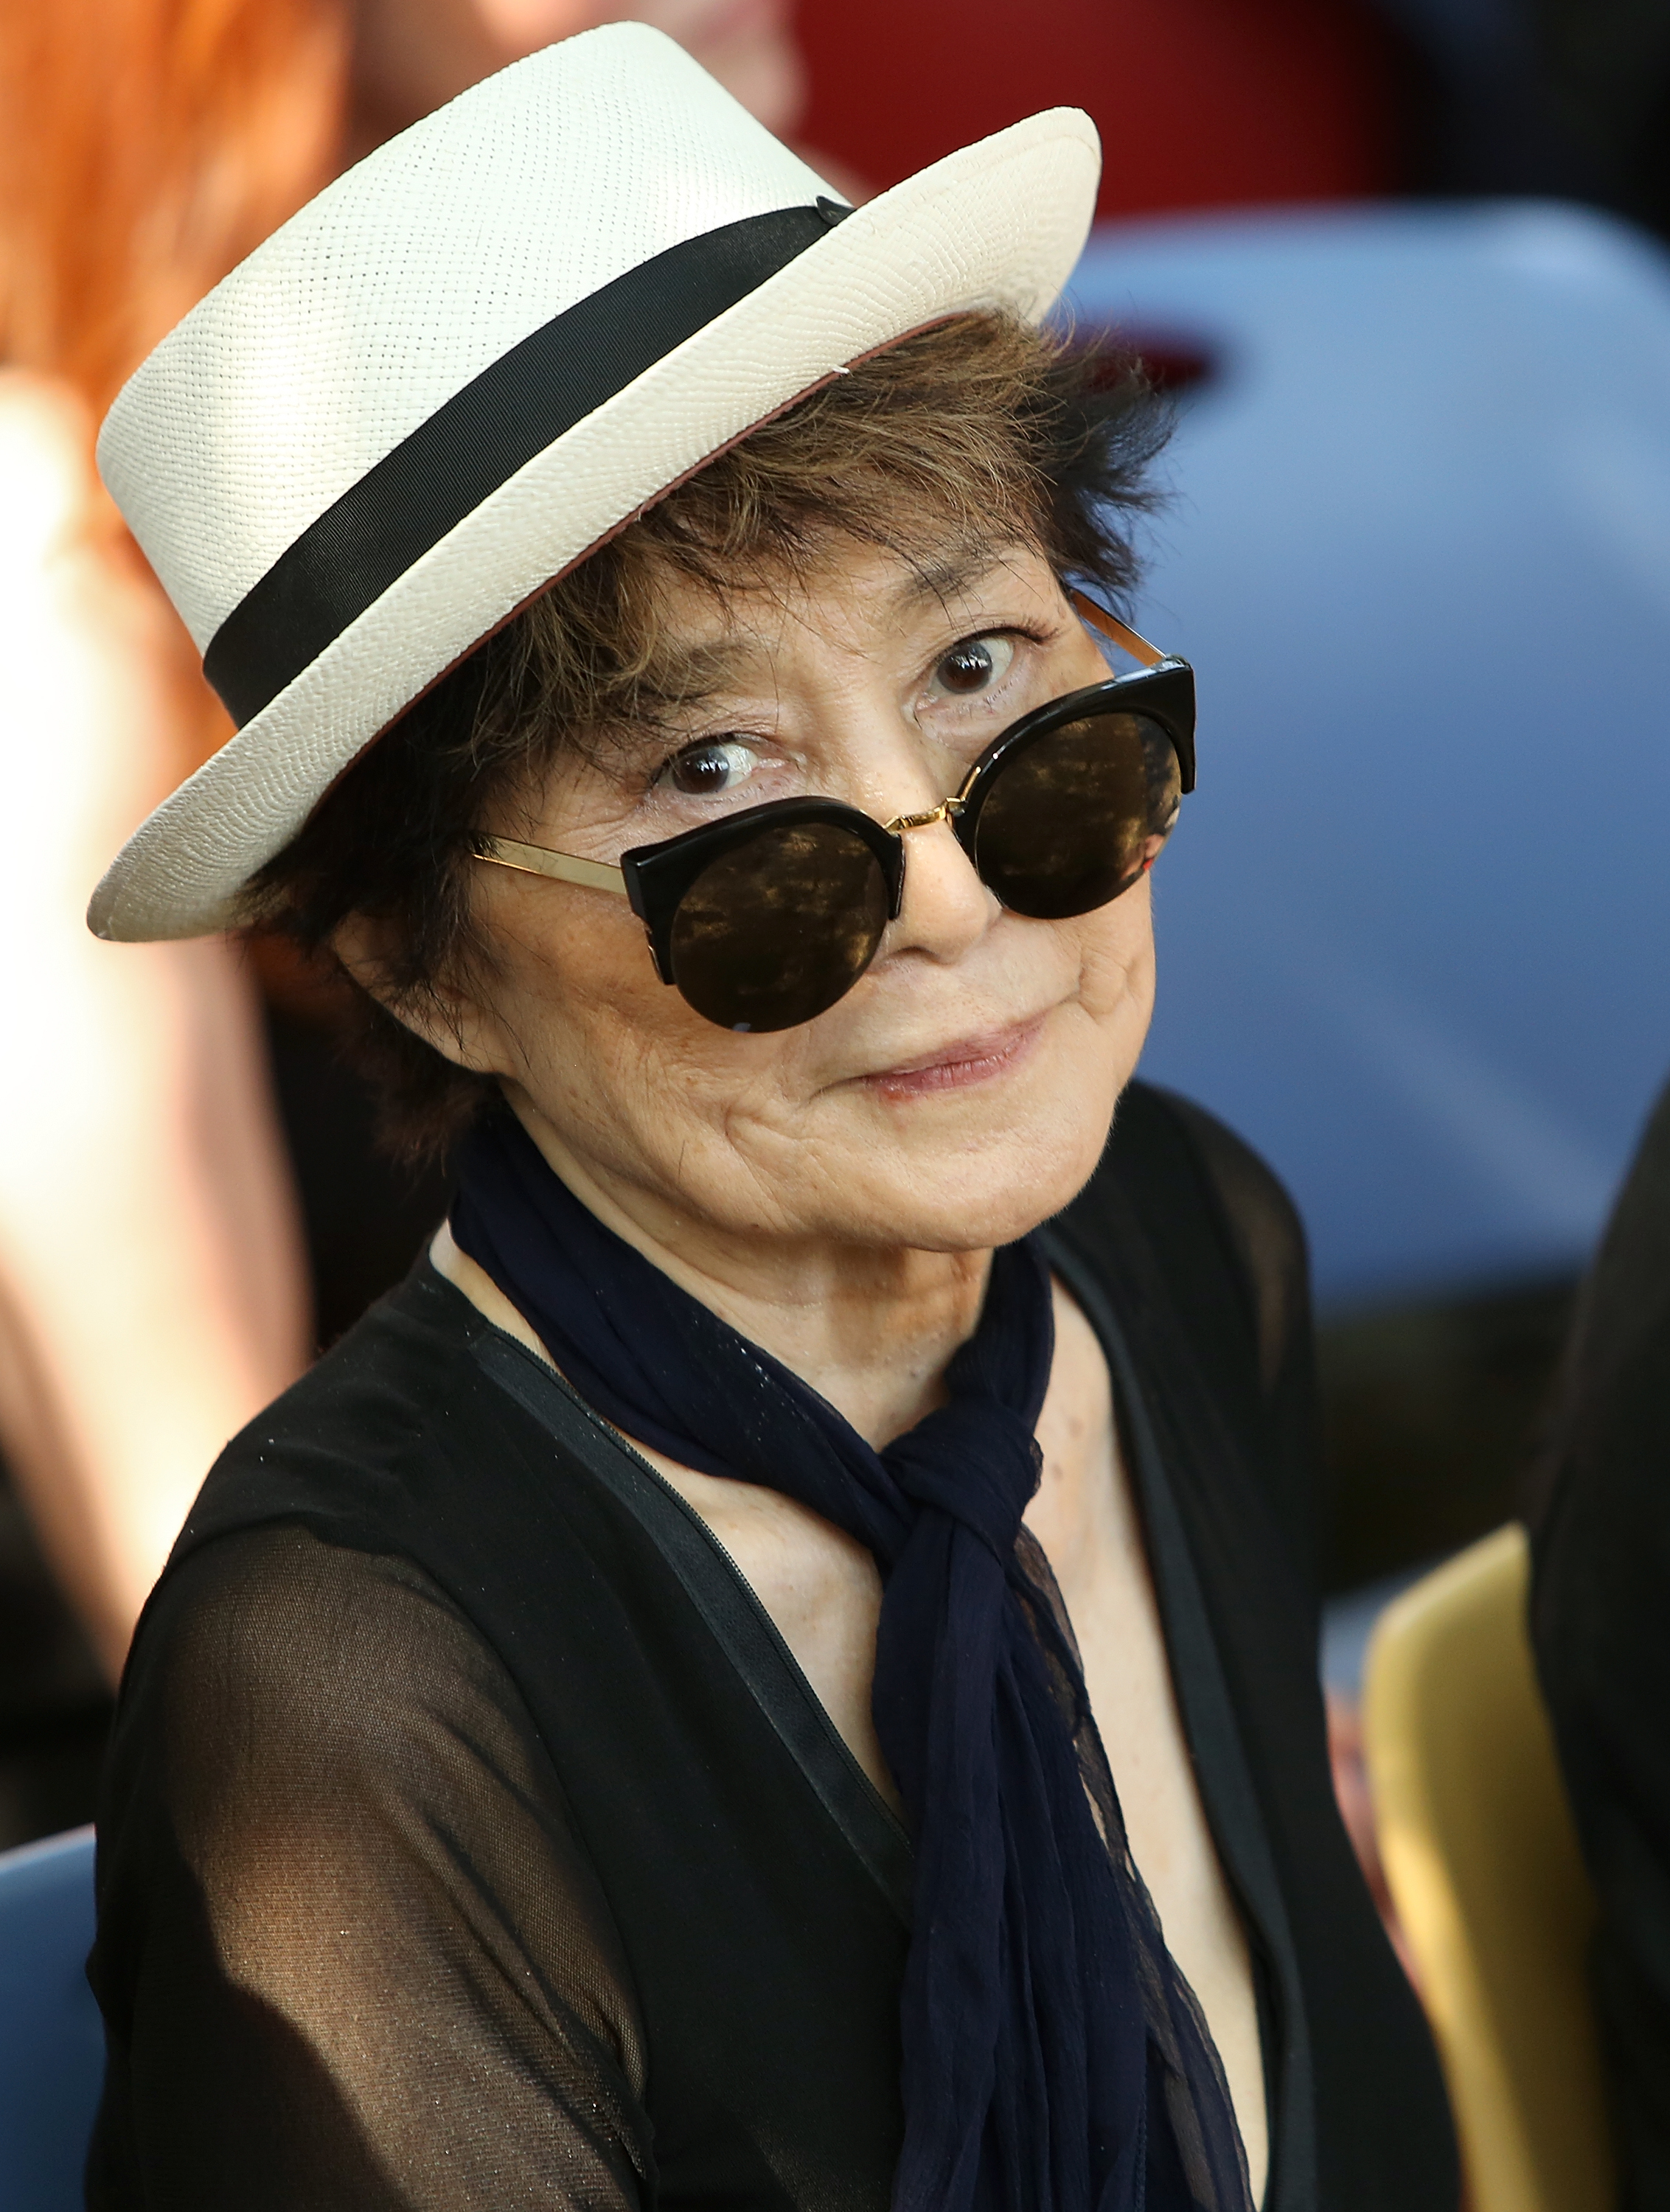 Yoko Ono attends the Amnesty International Tapestry Honoring John Lennon Unveiling on July 29, 2015 in New York City.